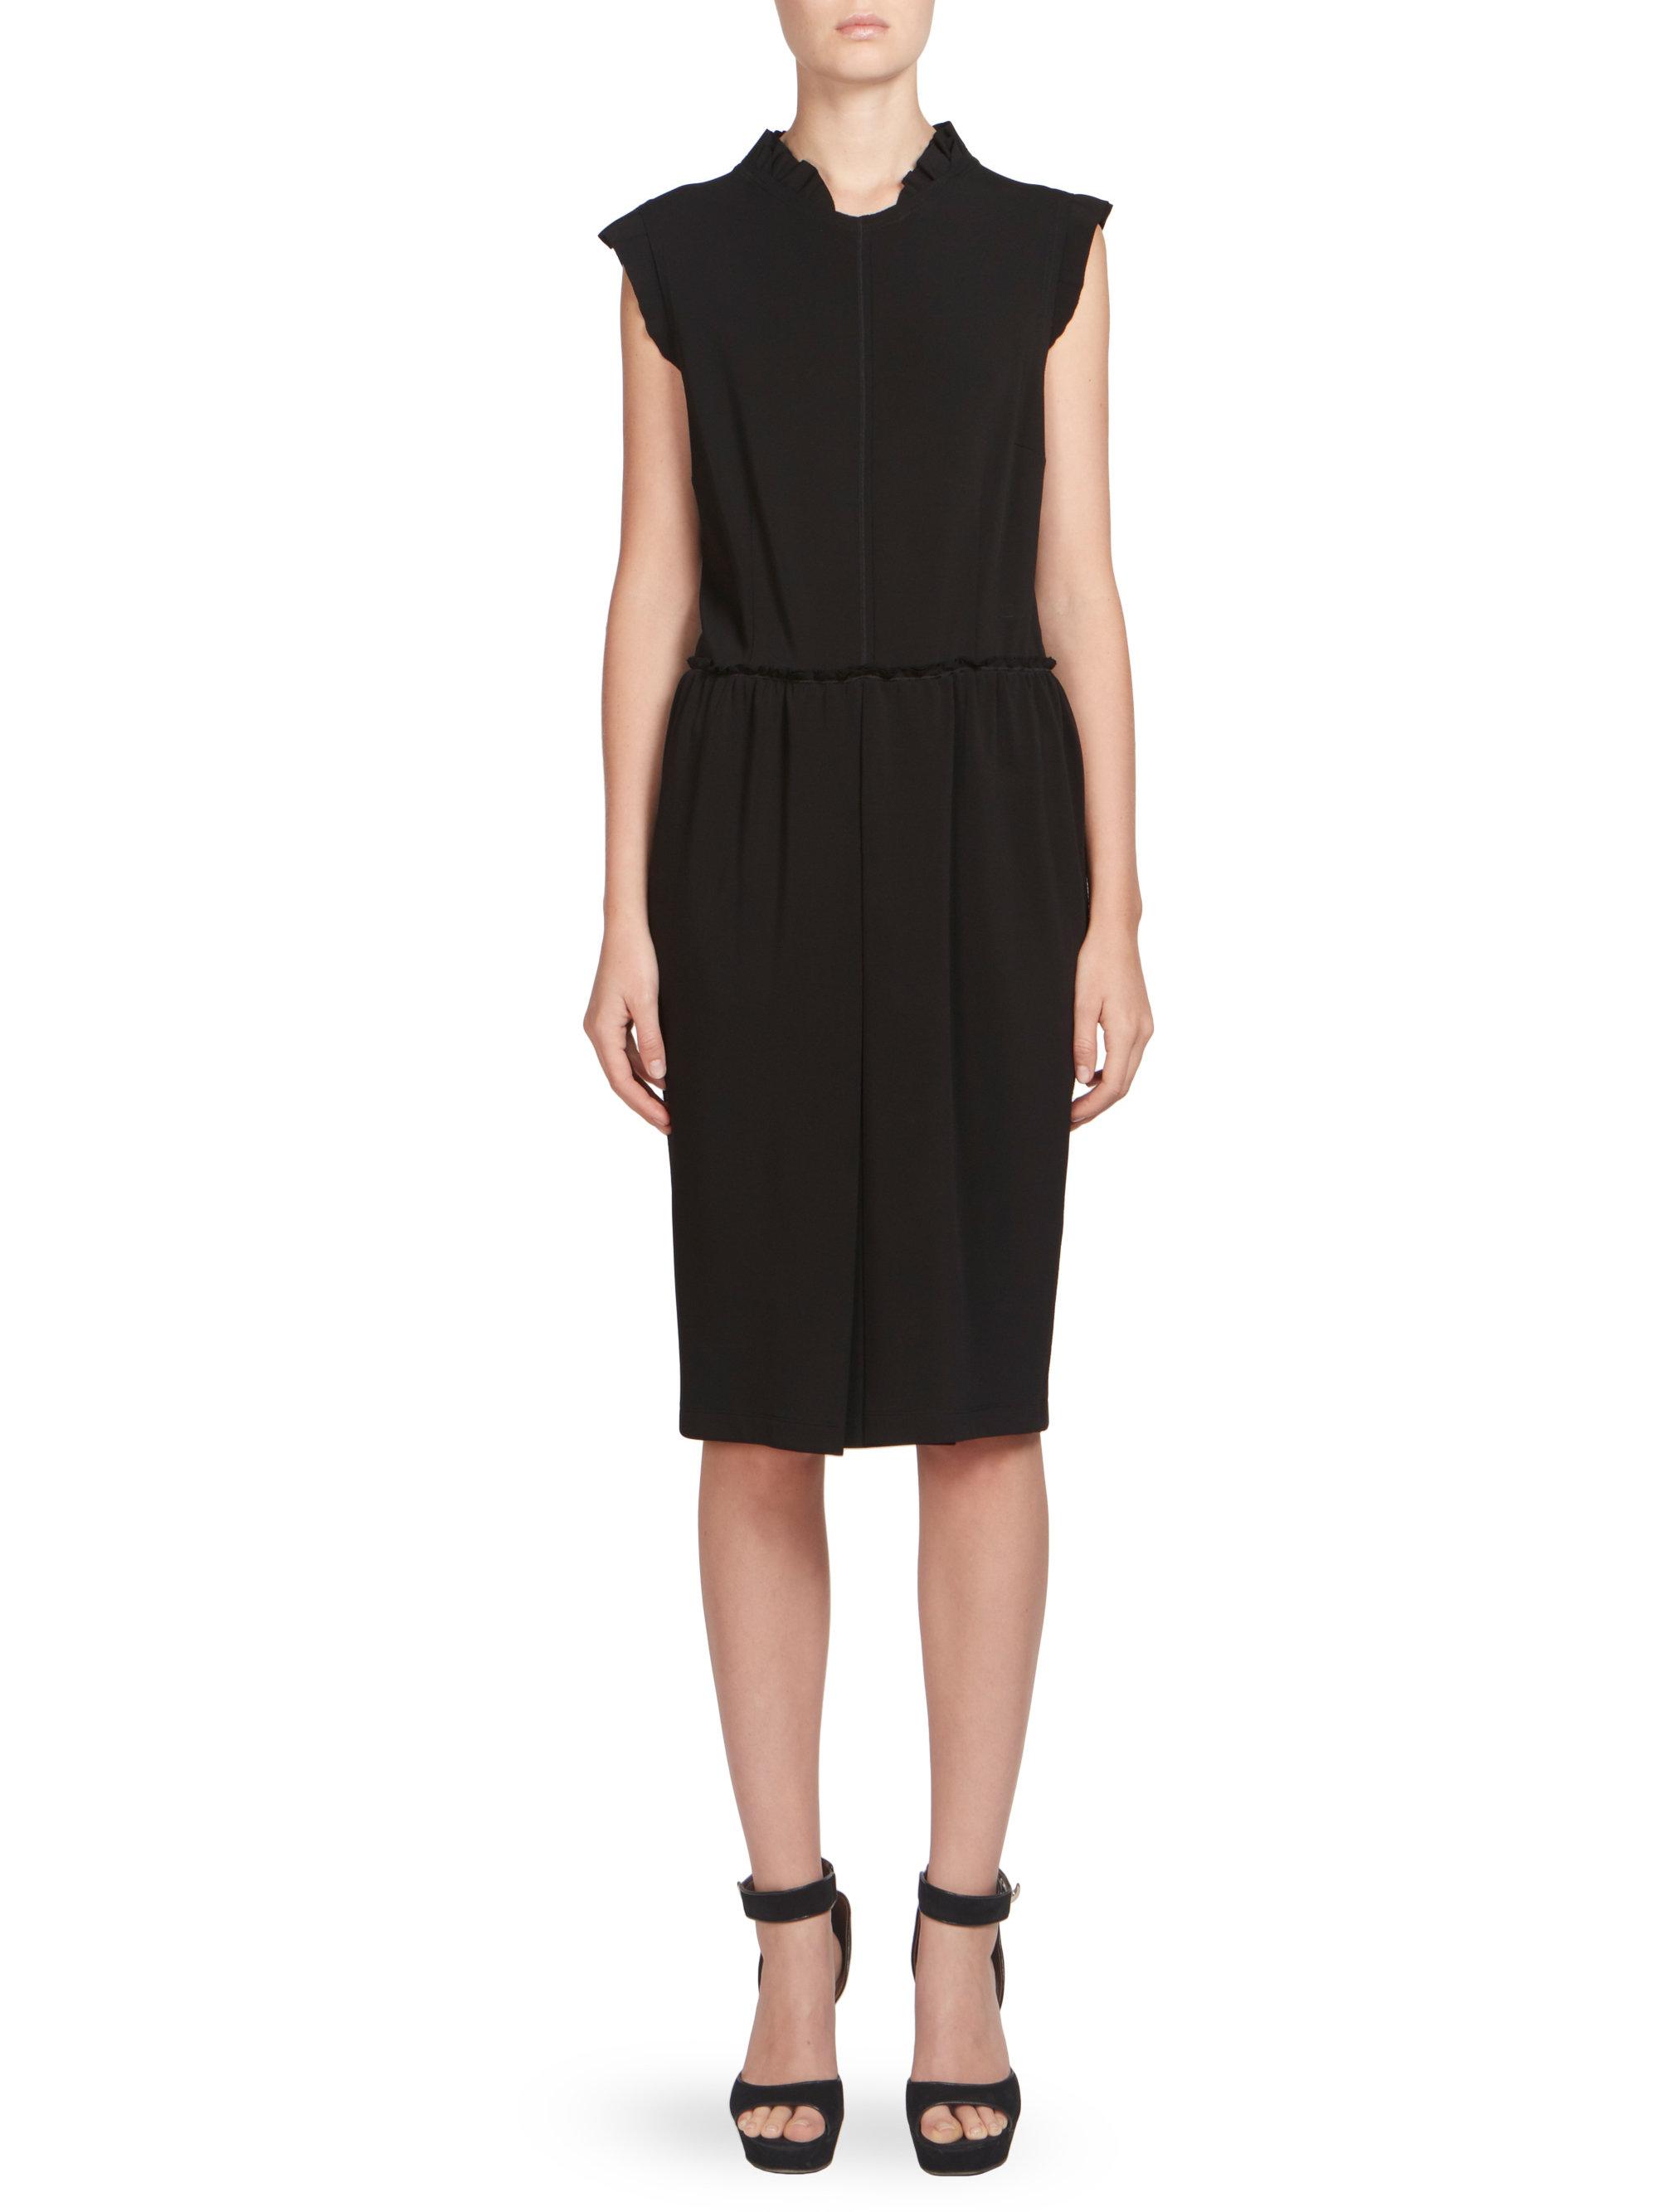 Lyst Givenchy Matte Jersey Dress in Black